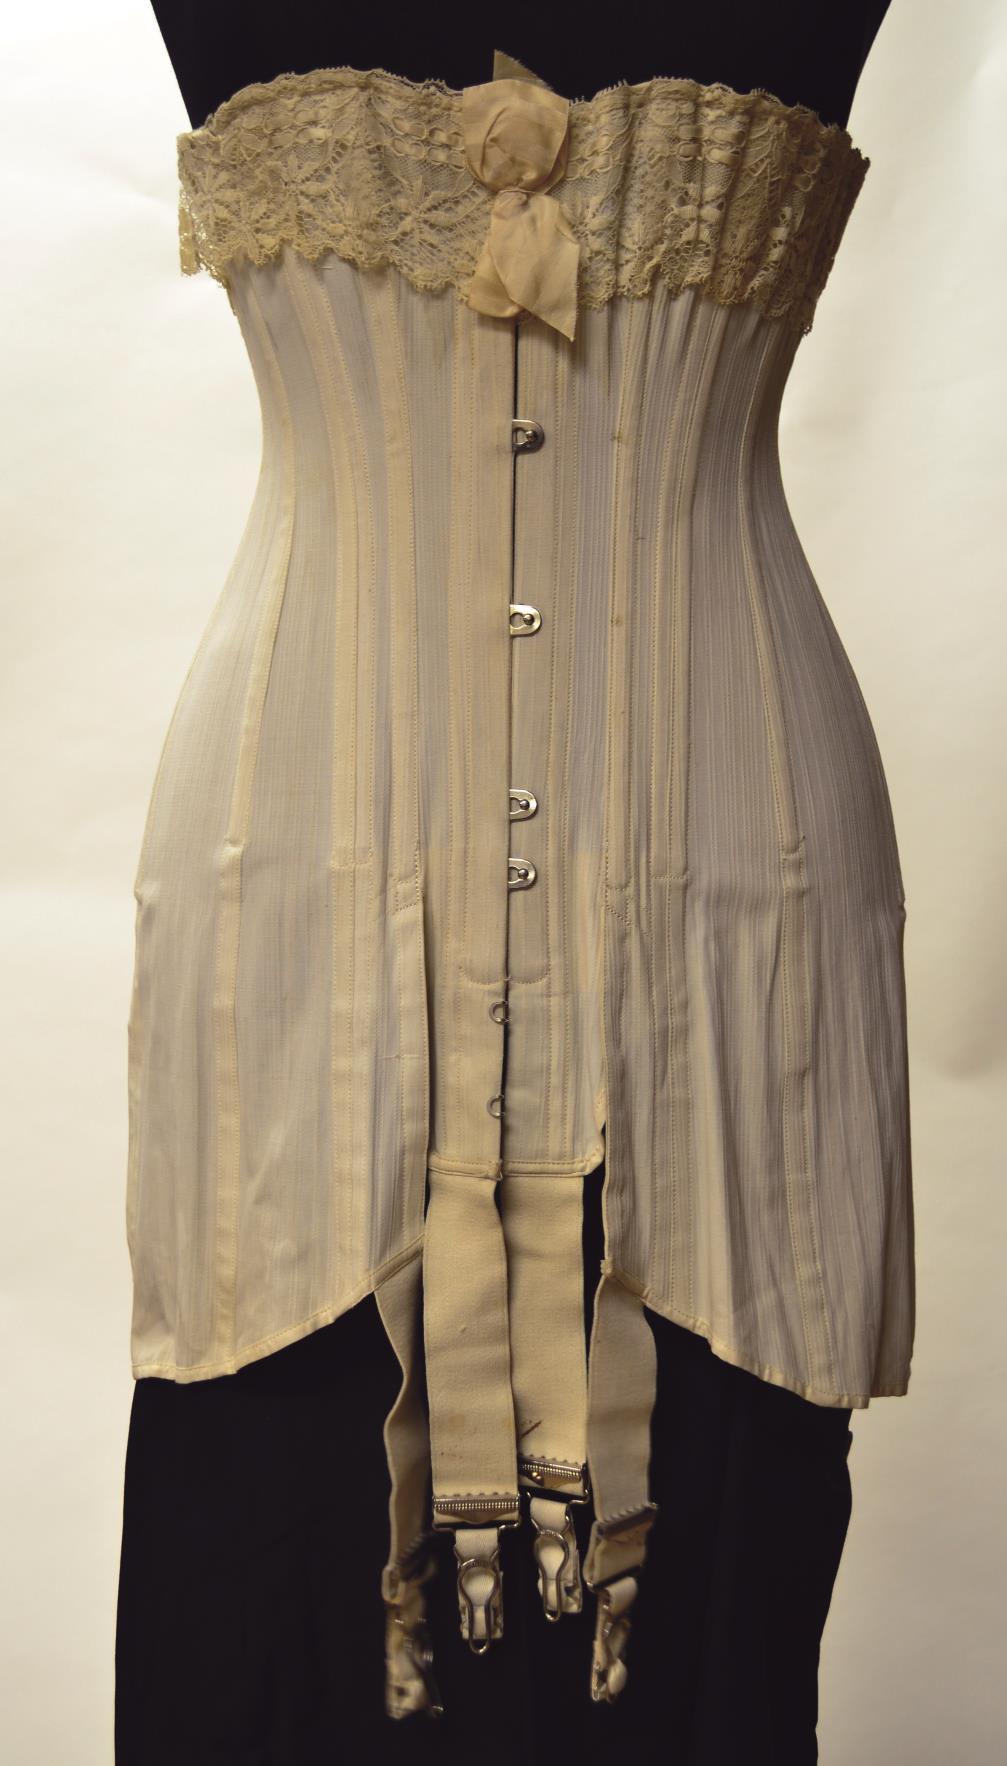 The panels of 1915 Deep Skirted Corset are designed to lengthen the body to create a long